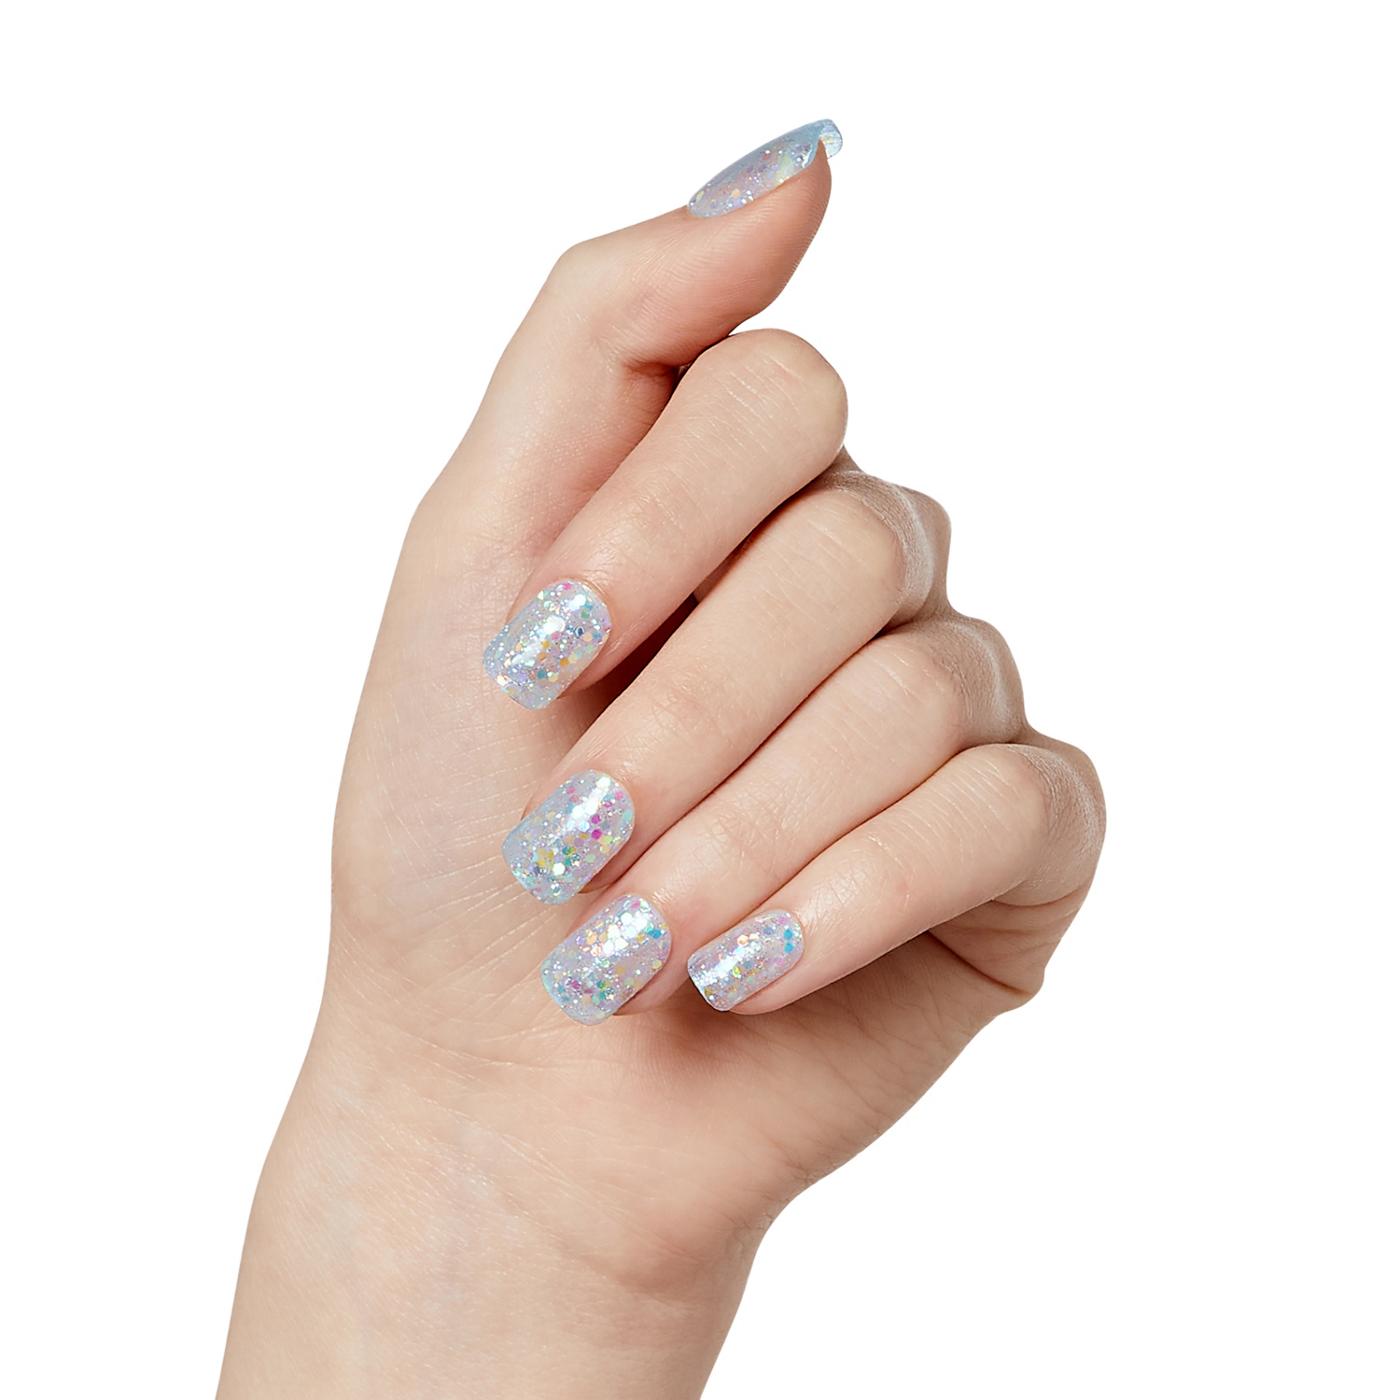 KISS Gel Fantasy Dream Dust Nails - Champagnes; image 5 of 6